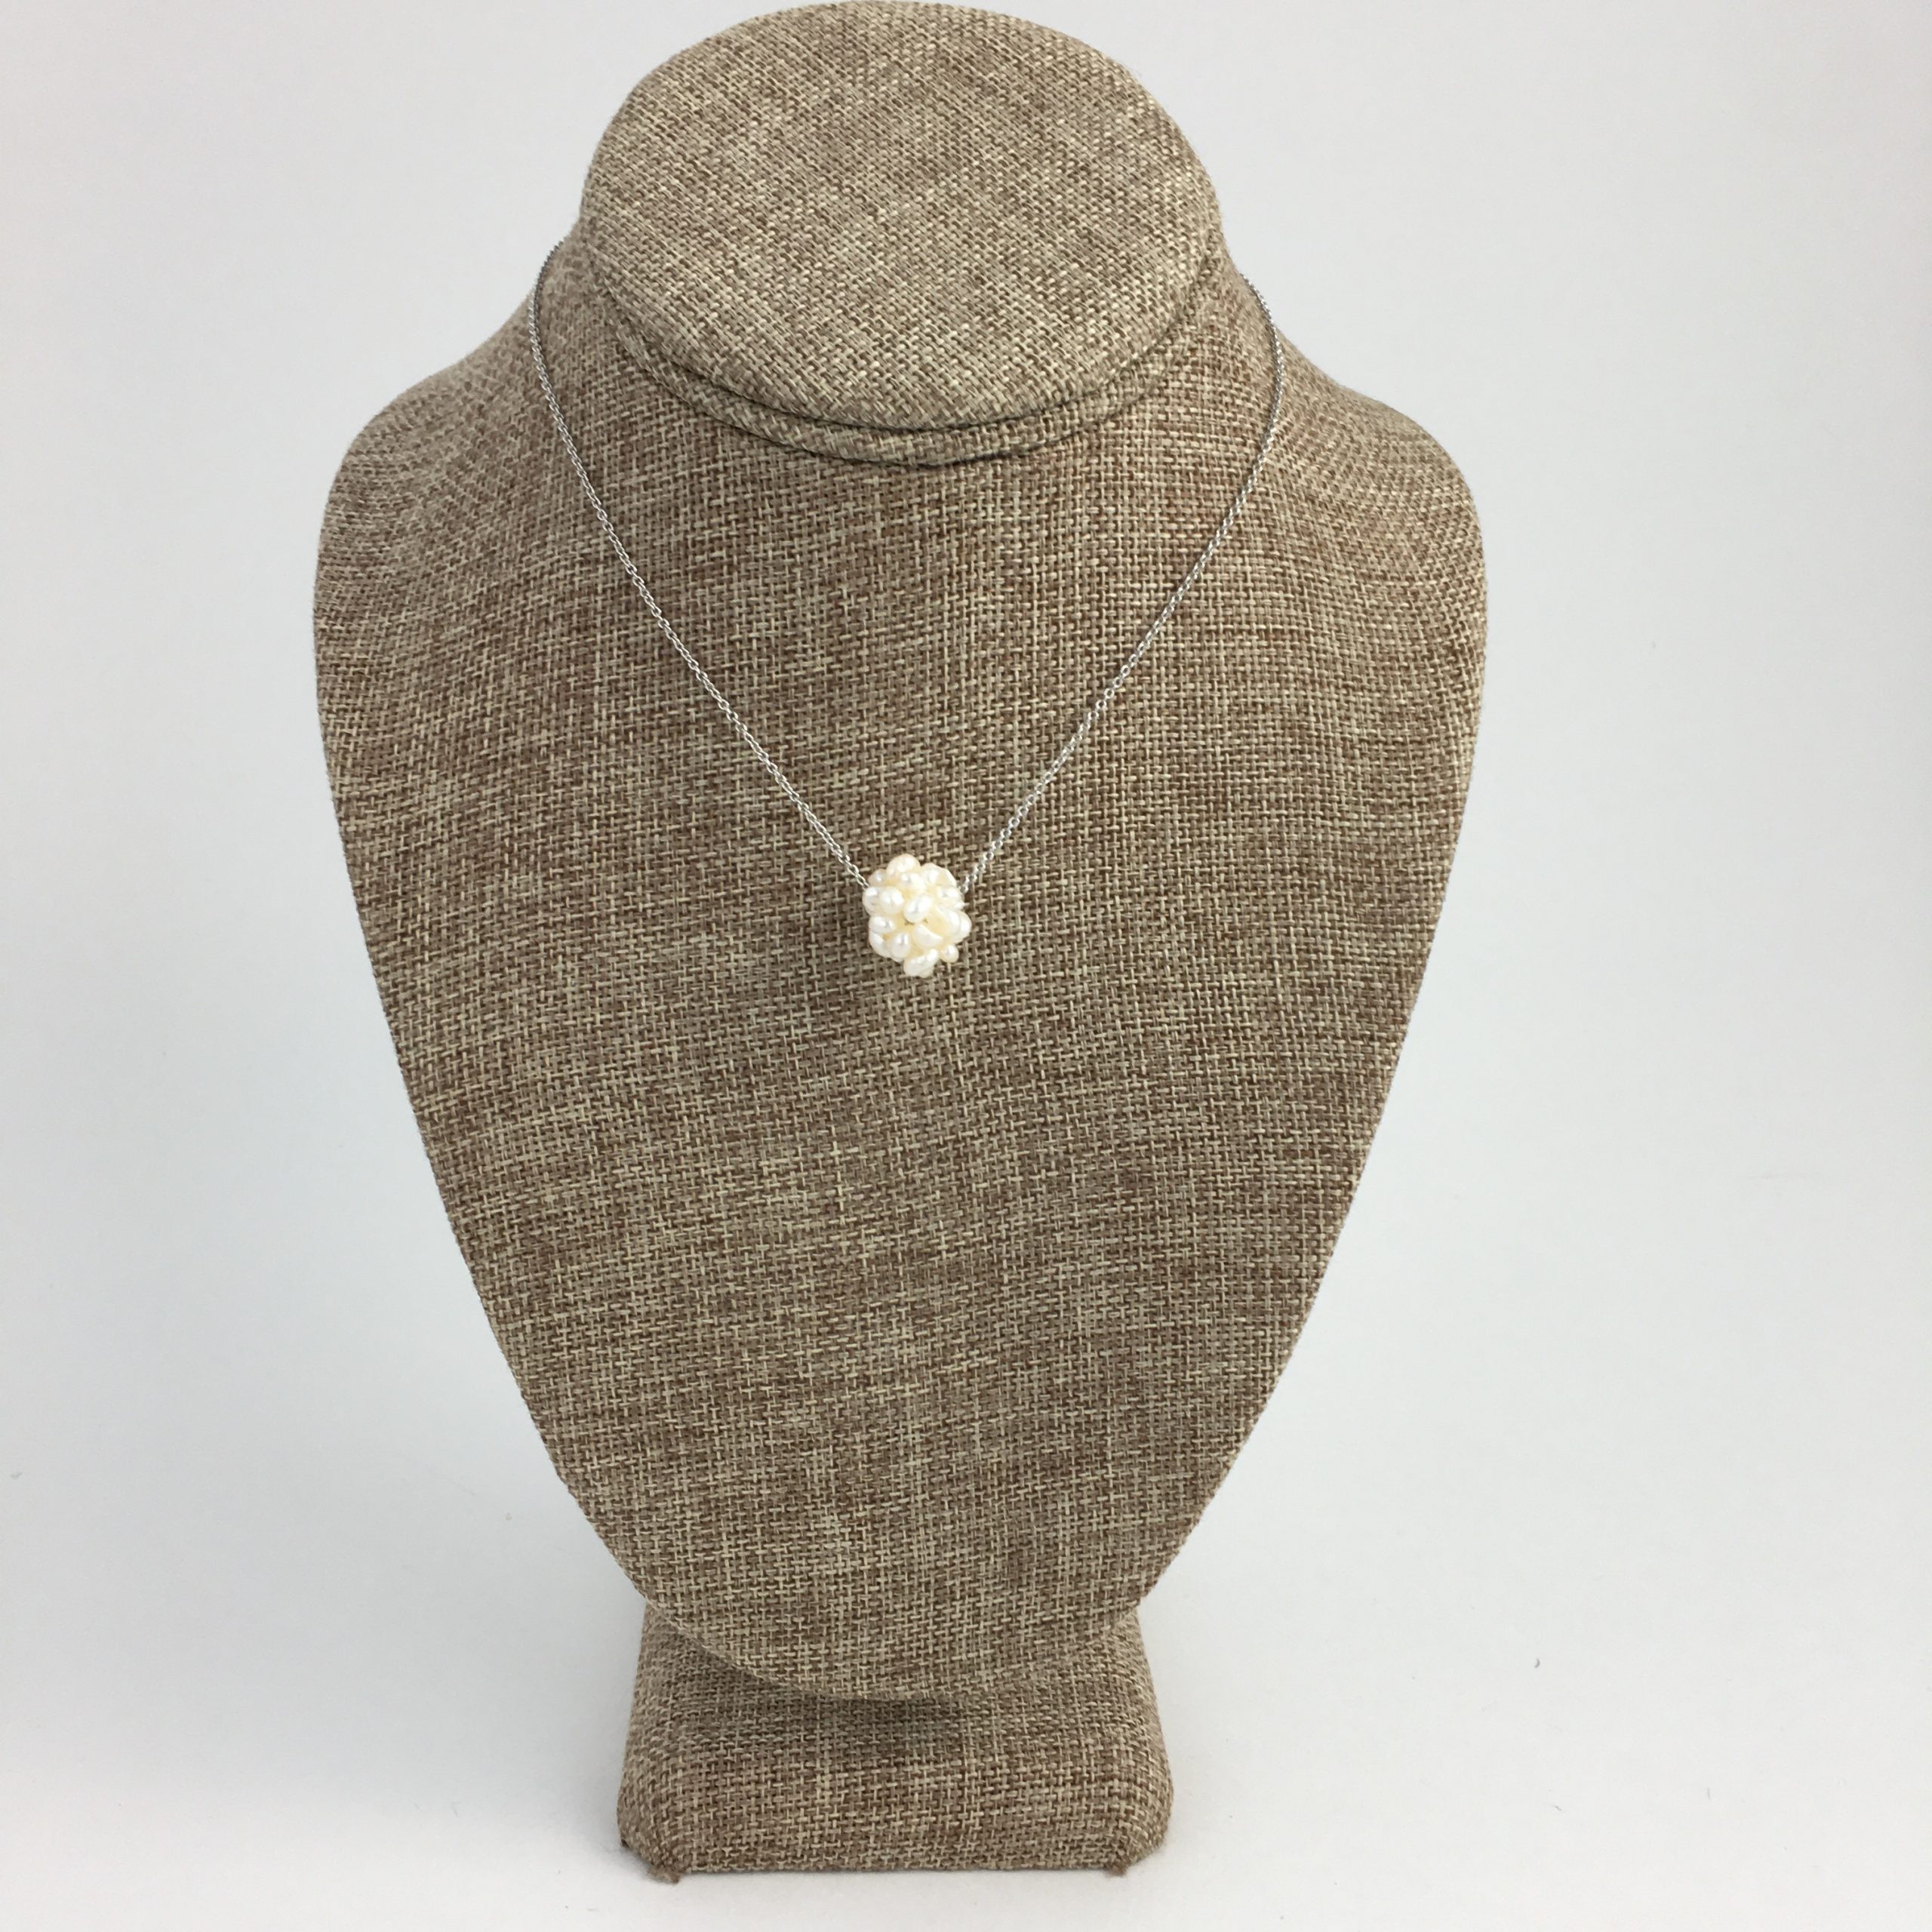 Shop Moonstone & Pearl Cluster Necklace by ATELIER MON at House of  Designers – HOUSE OF DESIGNERS